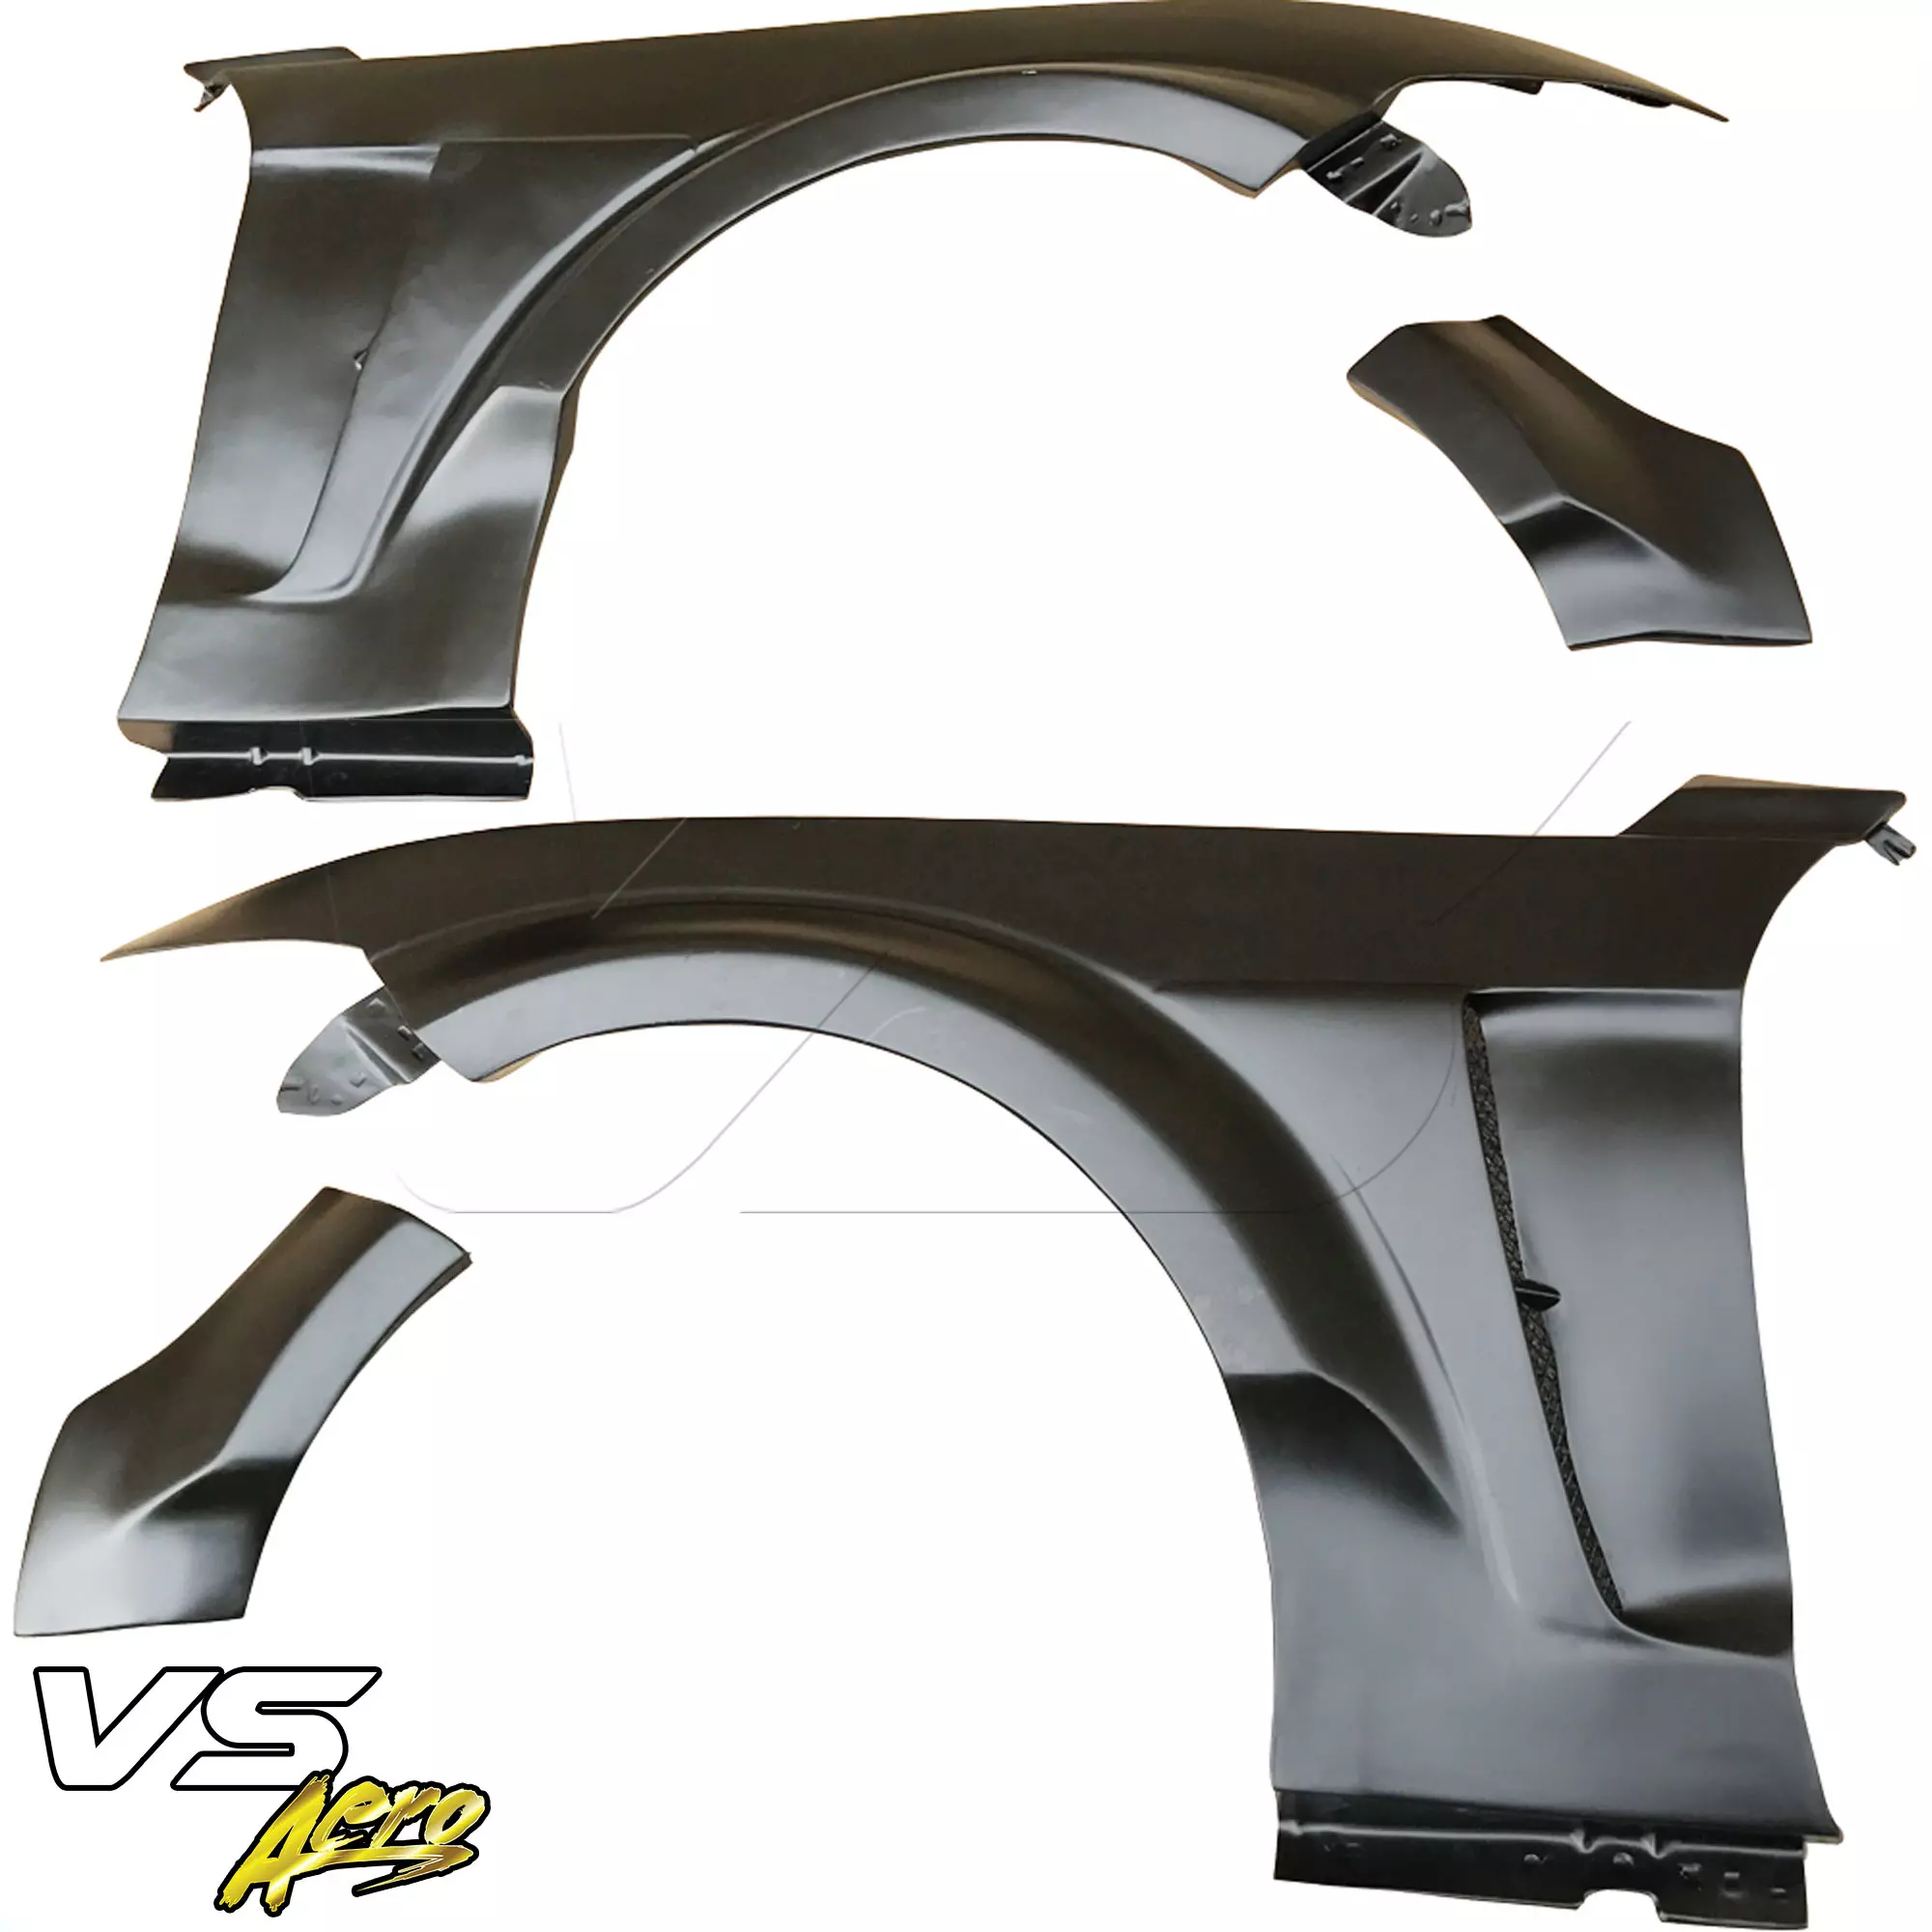 VSaero FRP KTOT Wide Body Fenders (front) > Ford Mustang 2015-2020 - Image 25